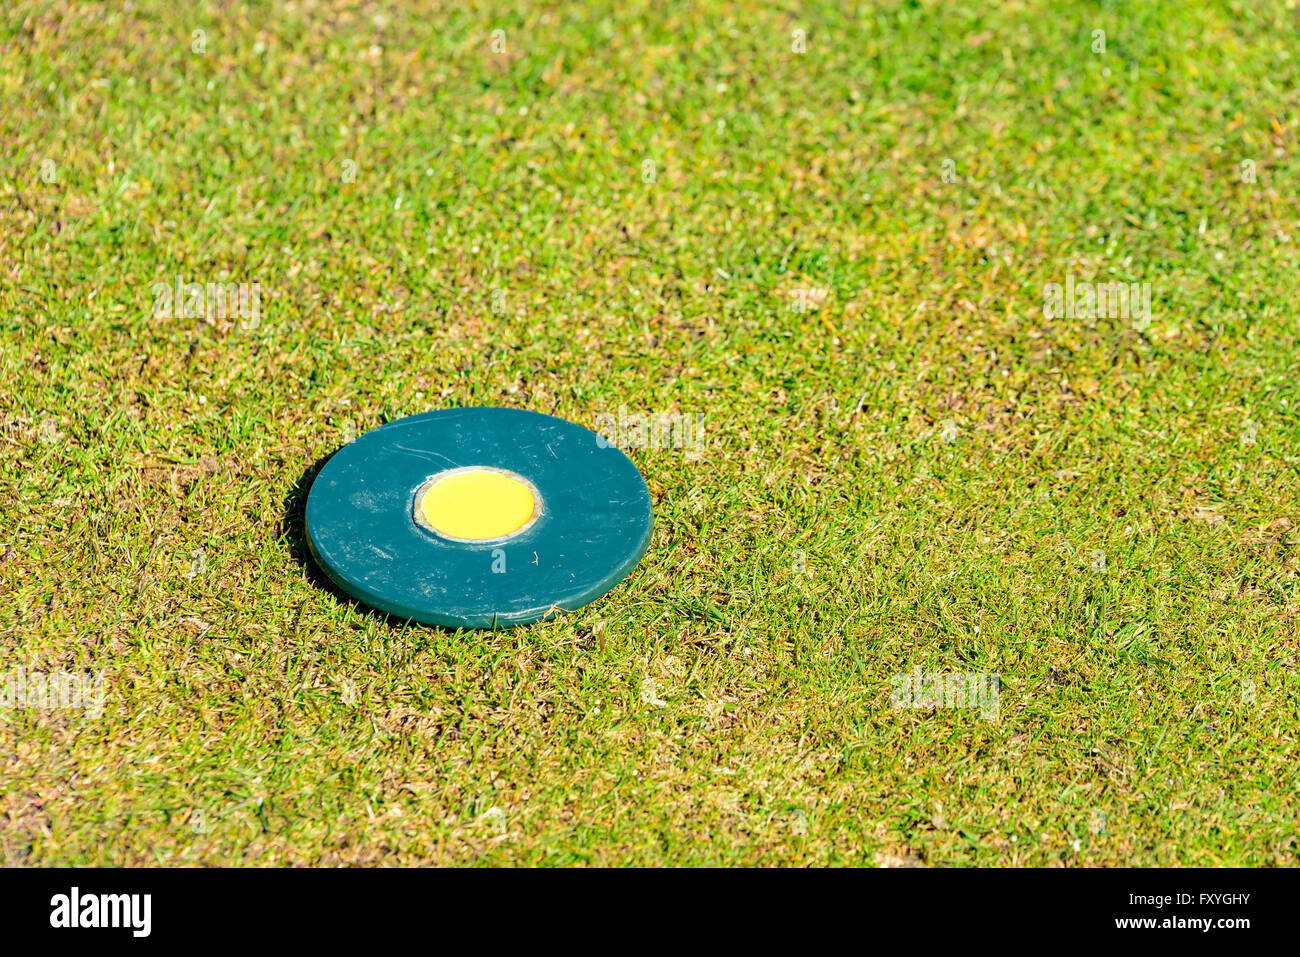 Circular marker lying on tee on a golf course. Nicely cut grass surround it. Copy space. Stock Photo